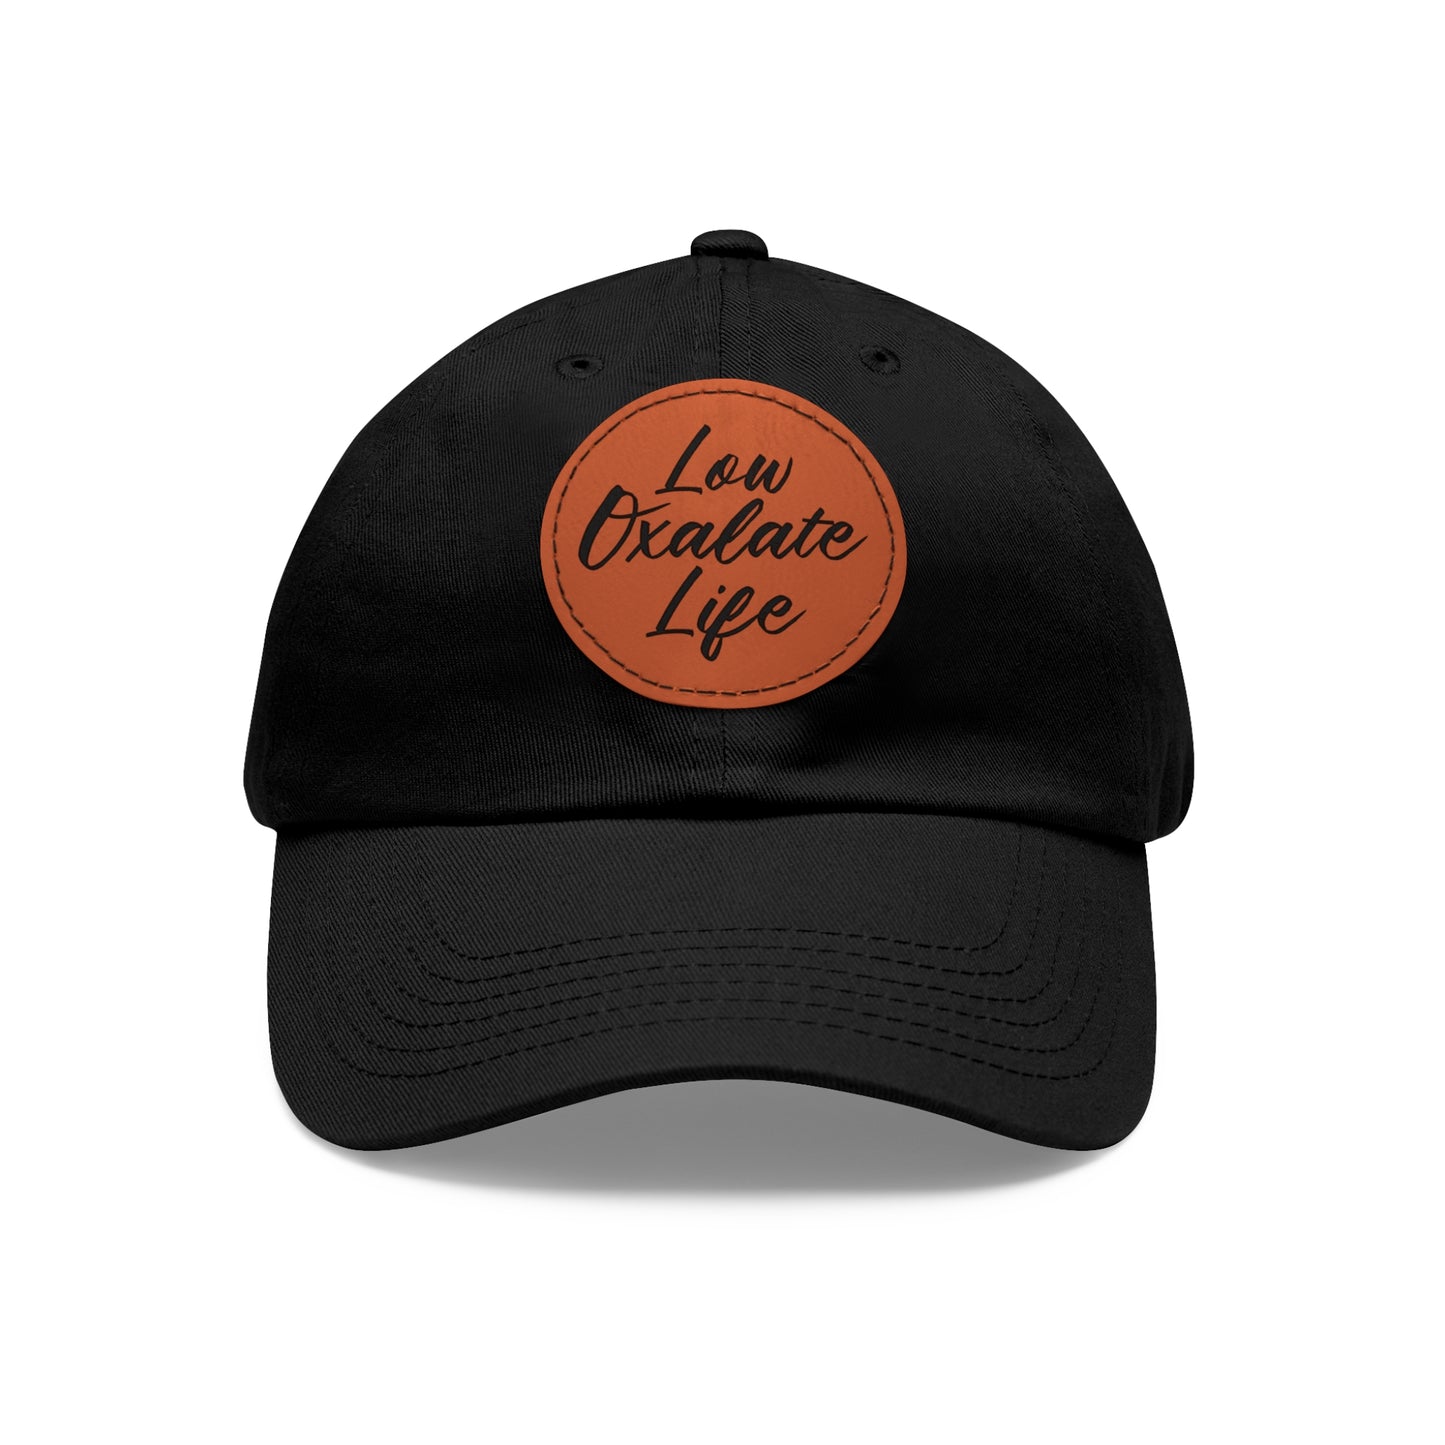 Black Cotton Cap Low Oxalate Life Circle Leather Patch